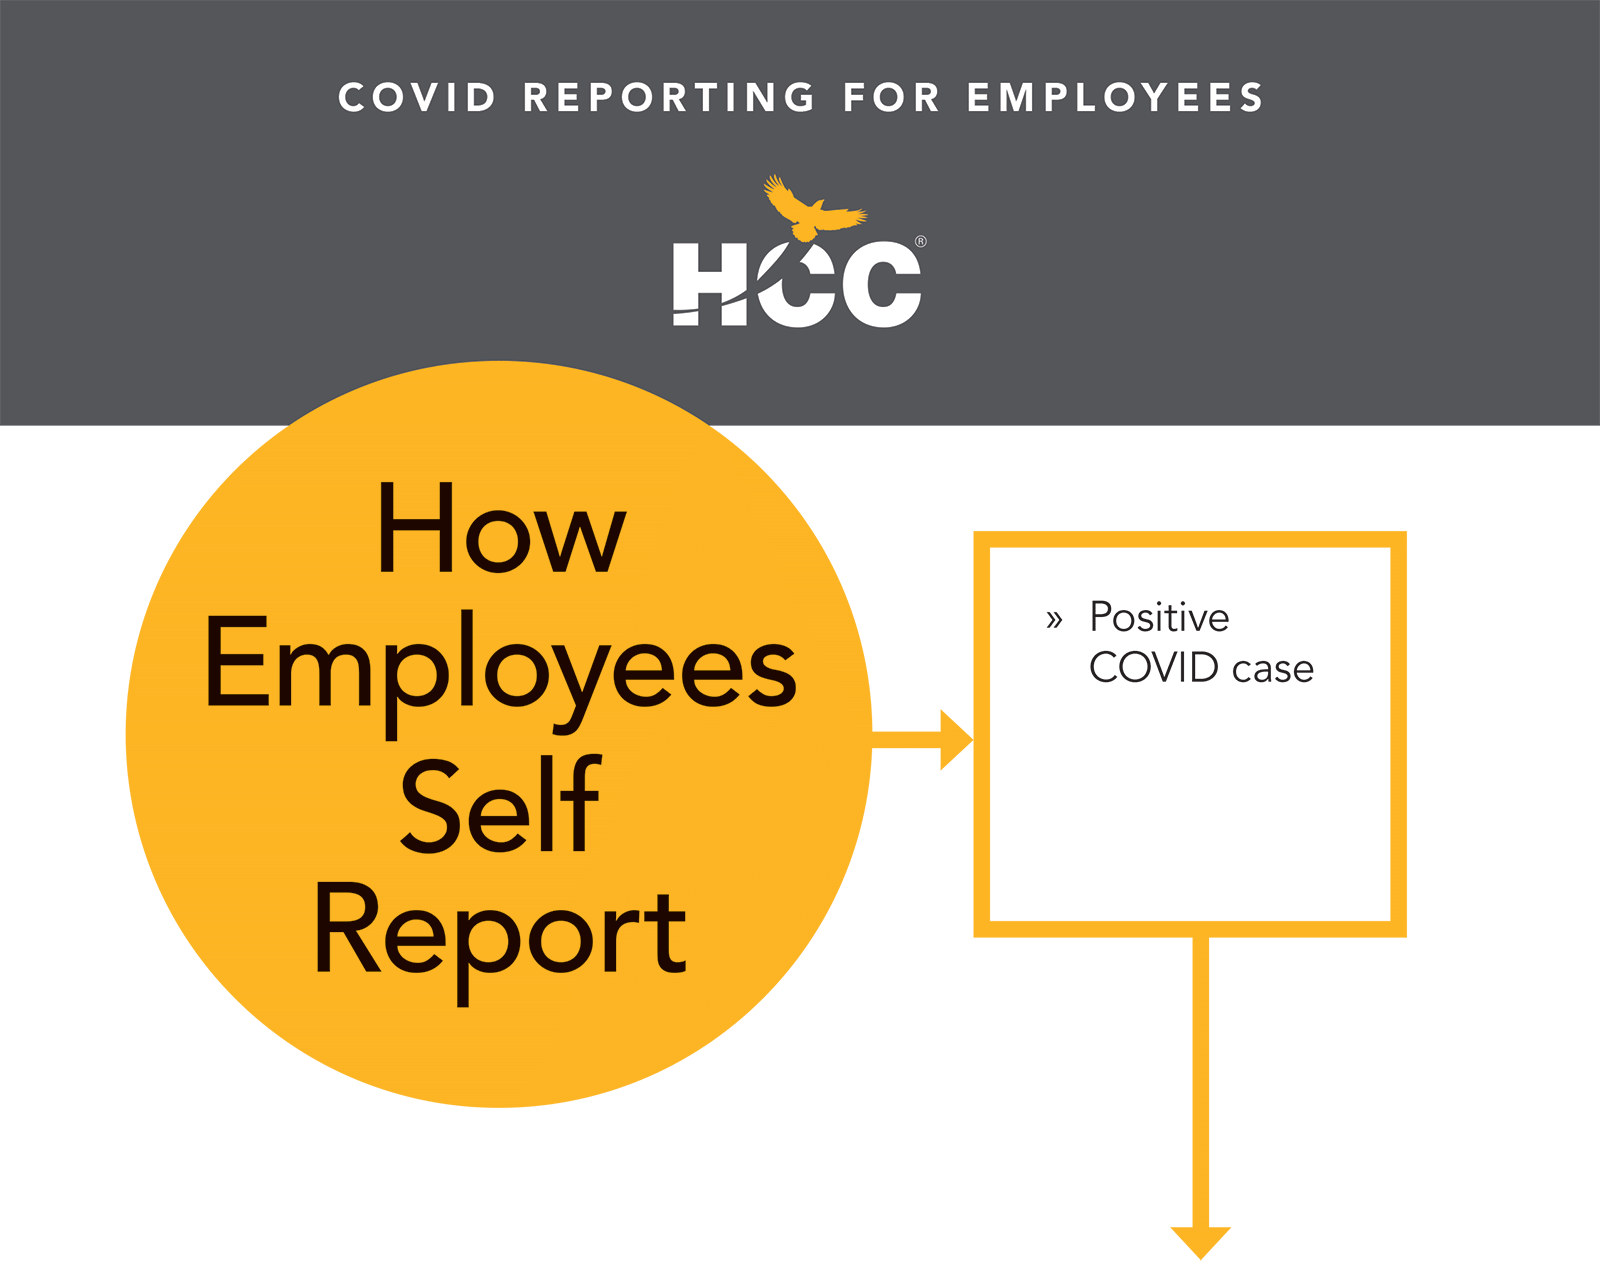 How Employees Self Report:  Positive Covid Case